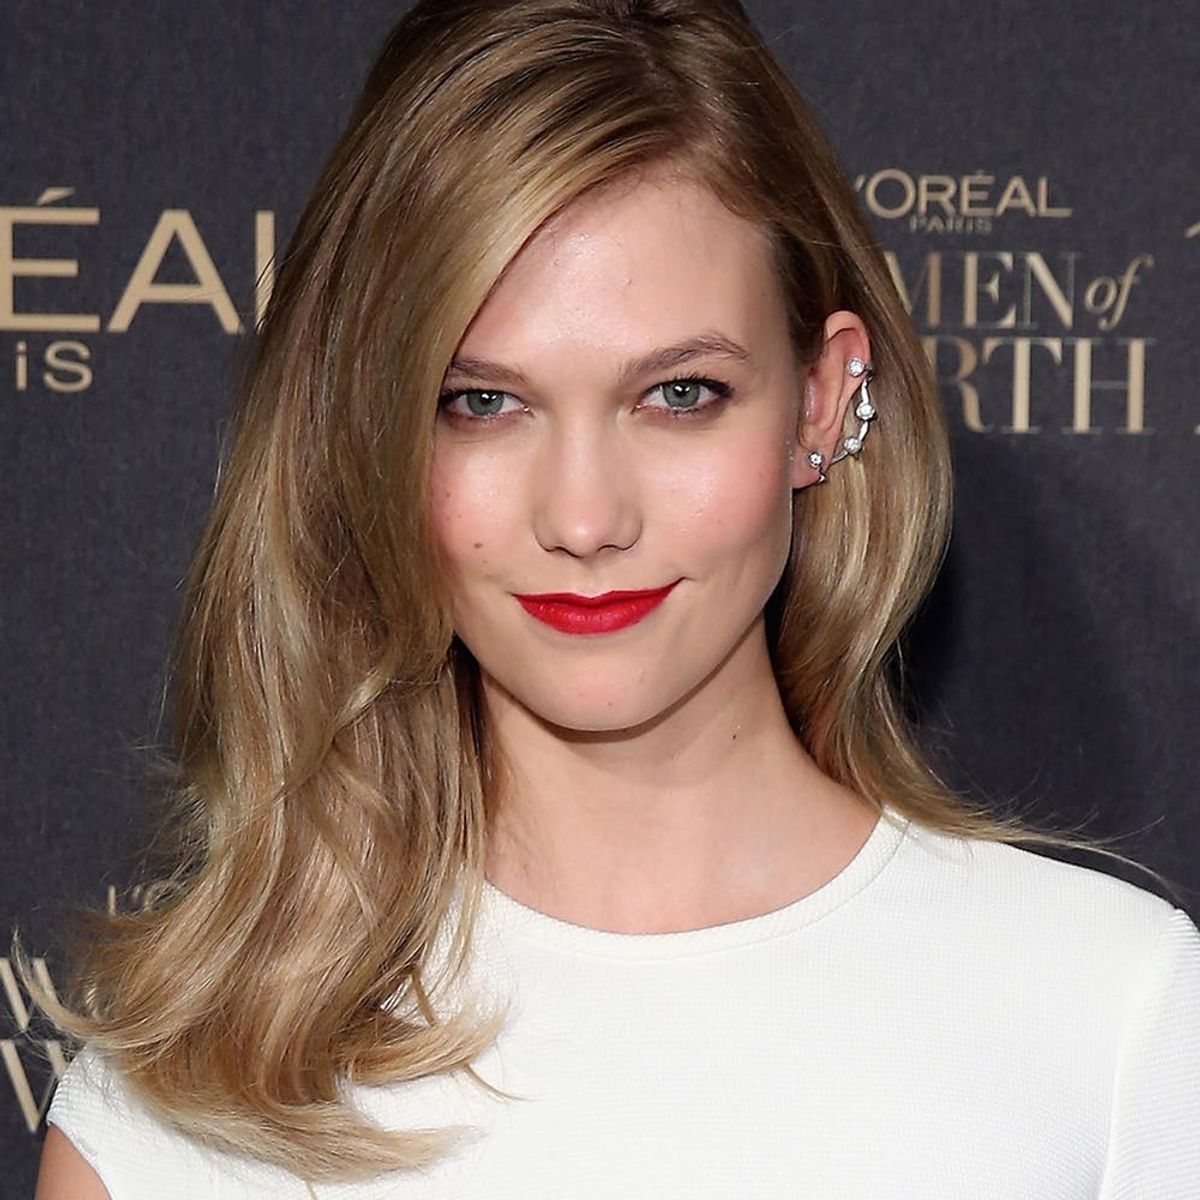 Karlie Kloss Is Starting the Coolest Summer Camp for Girls - Brit + Co